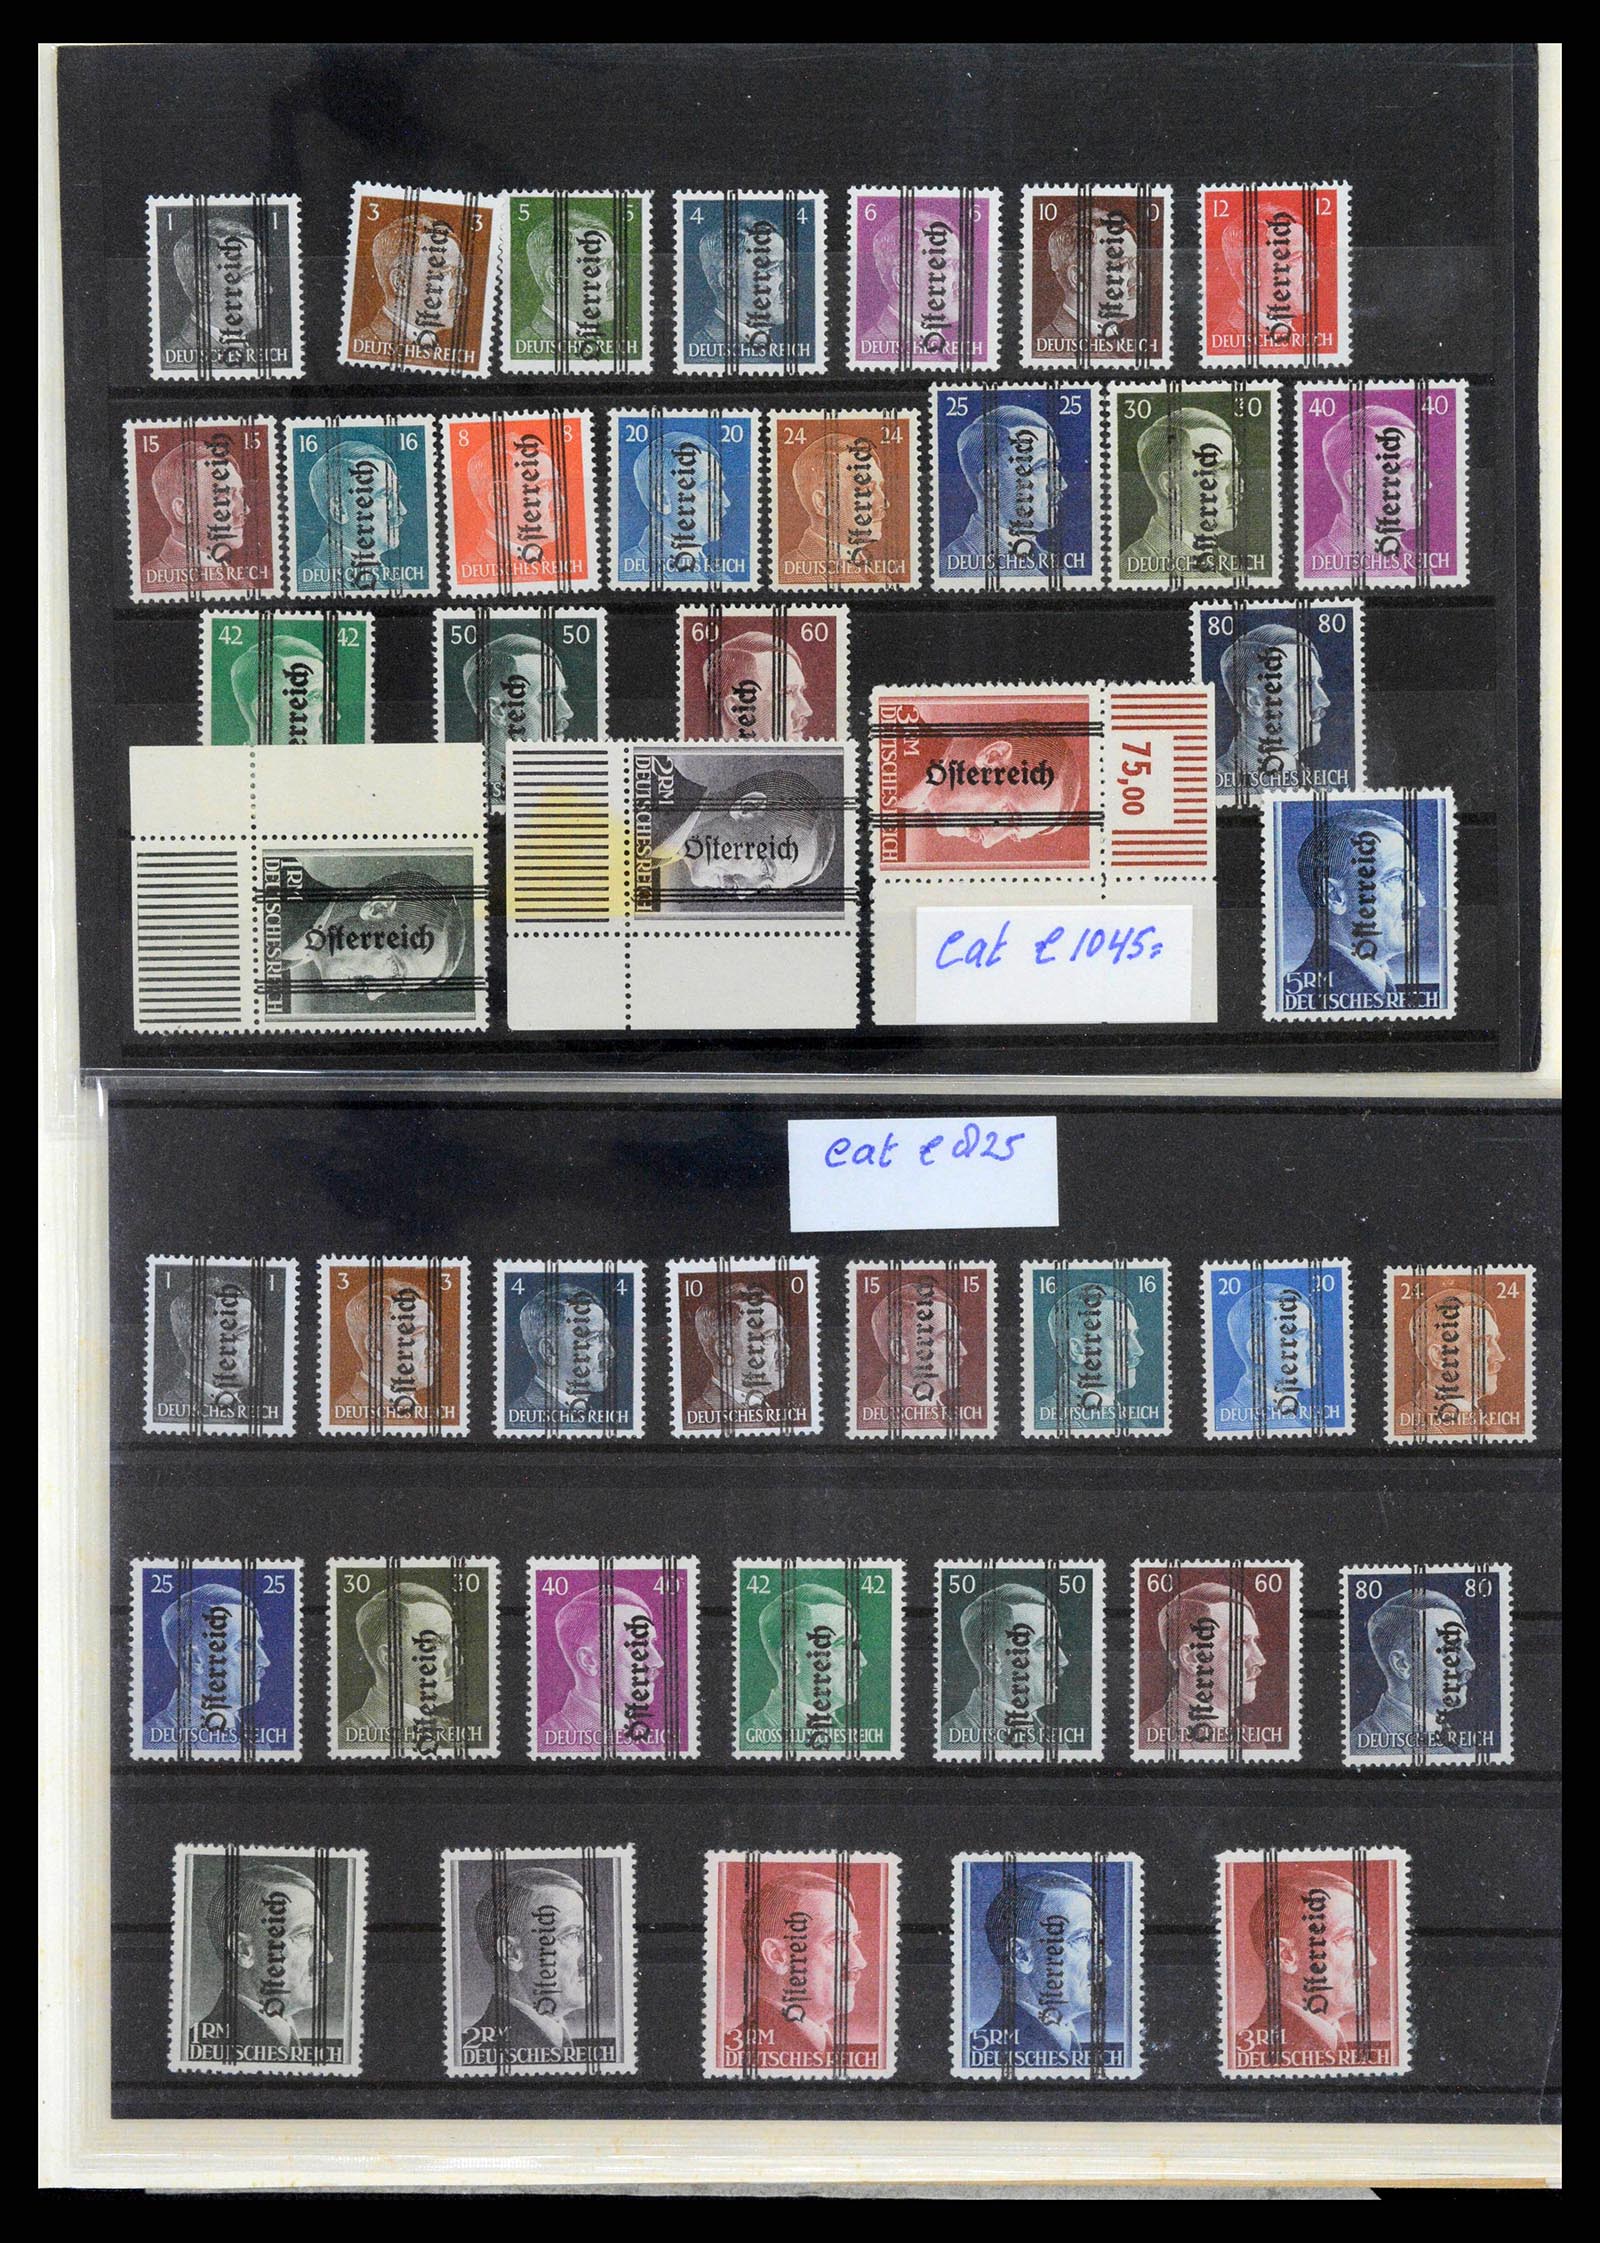 38399 0001 - Stamp collection 38399 Austria 1945-1950.